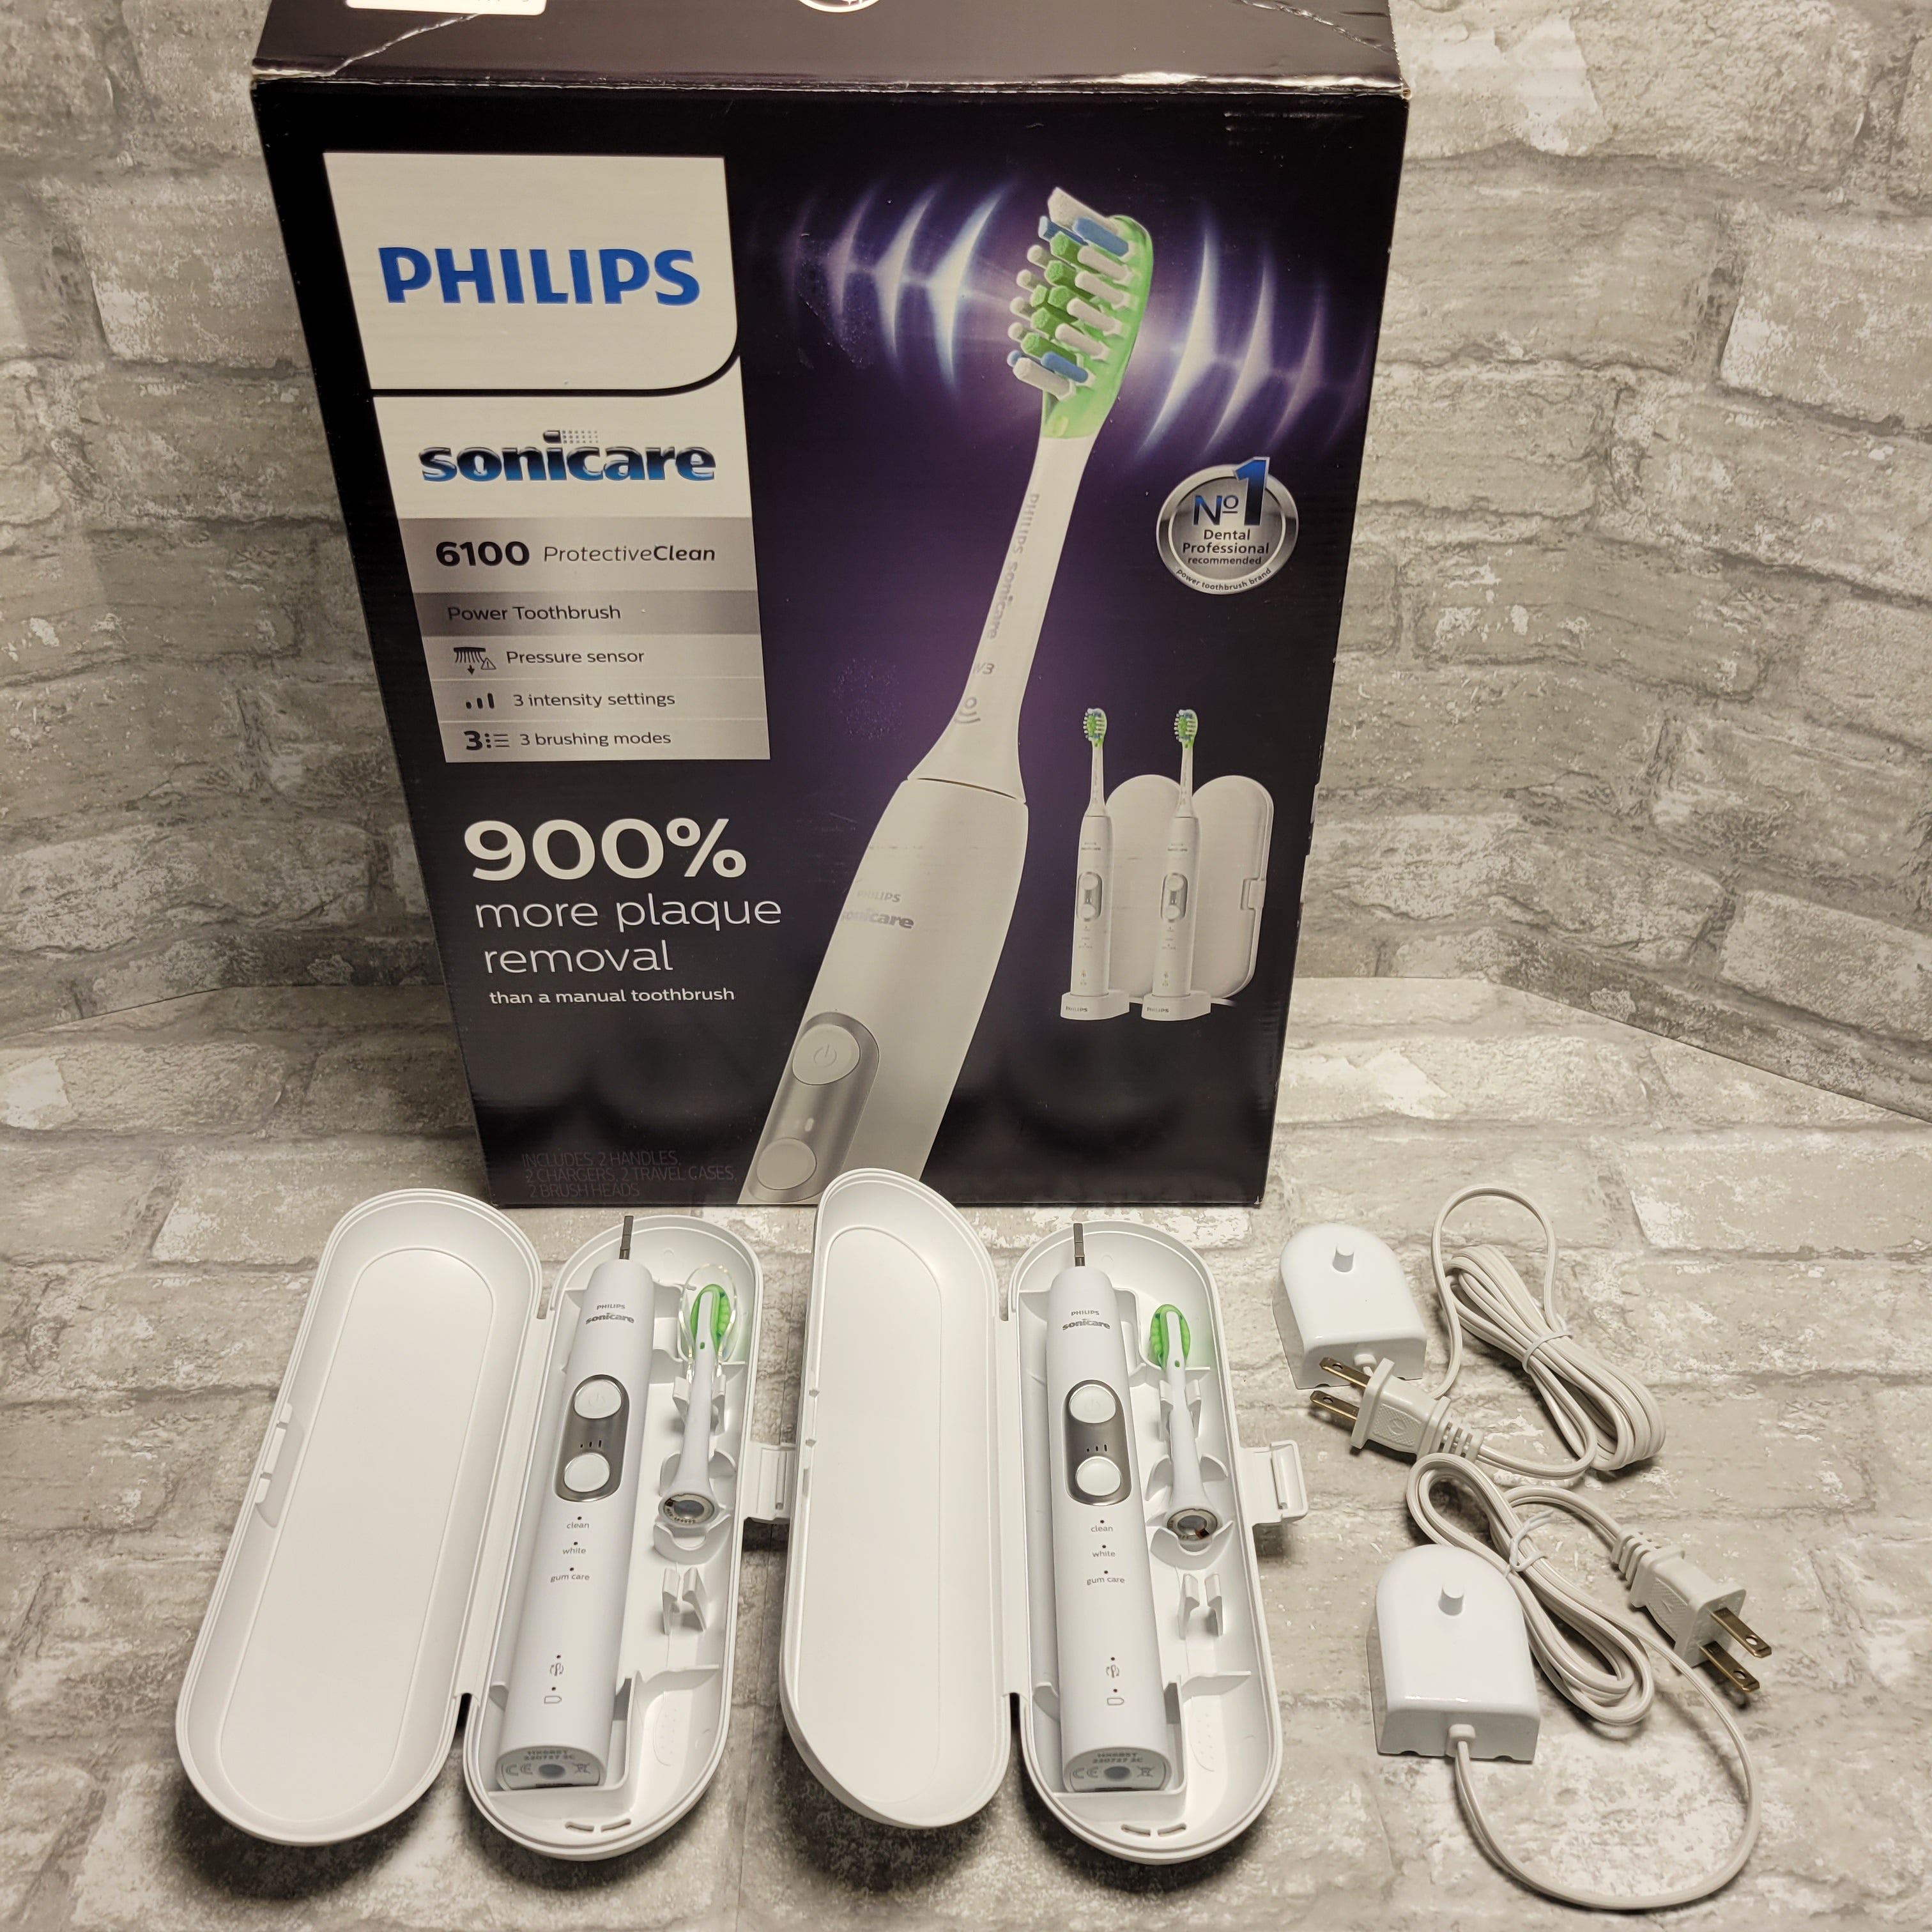 Philips Sonicare 6100 Protective Clean HX6423/85 Sonic Toothbrush Pack of 2 (8042005561582)